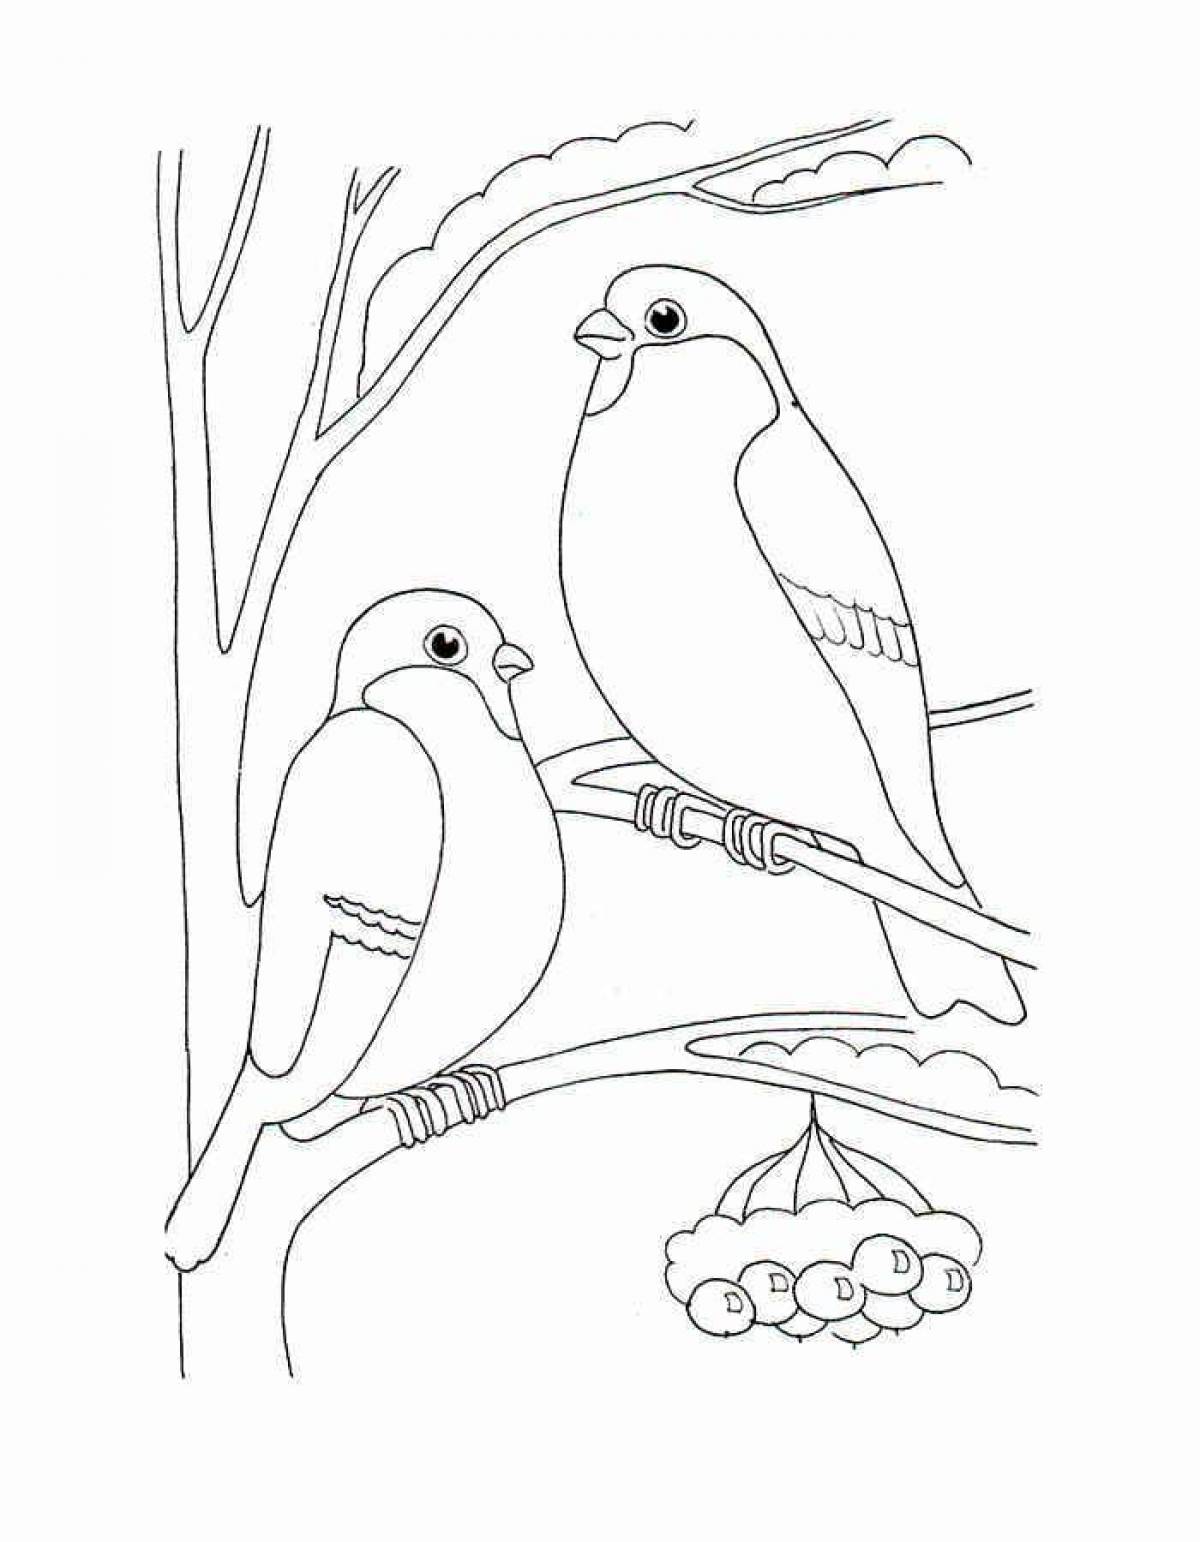 Coloring book cheerful bullfinch for kids